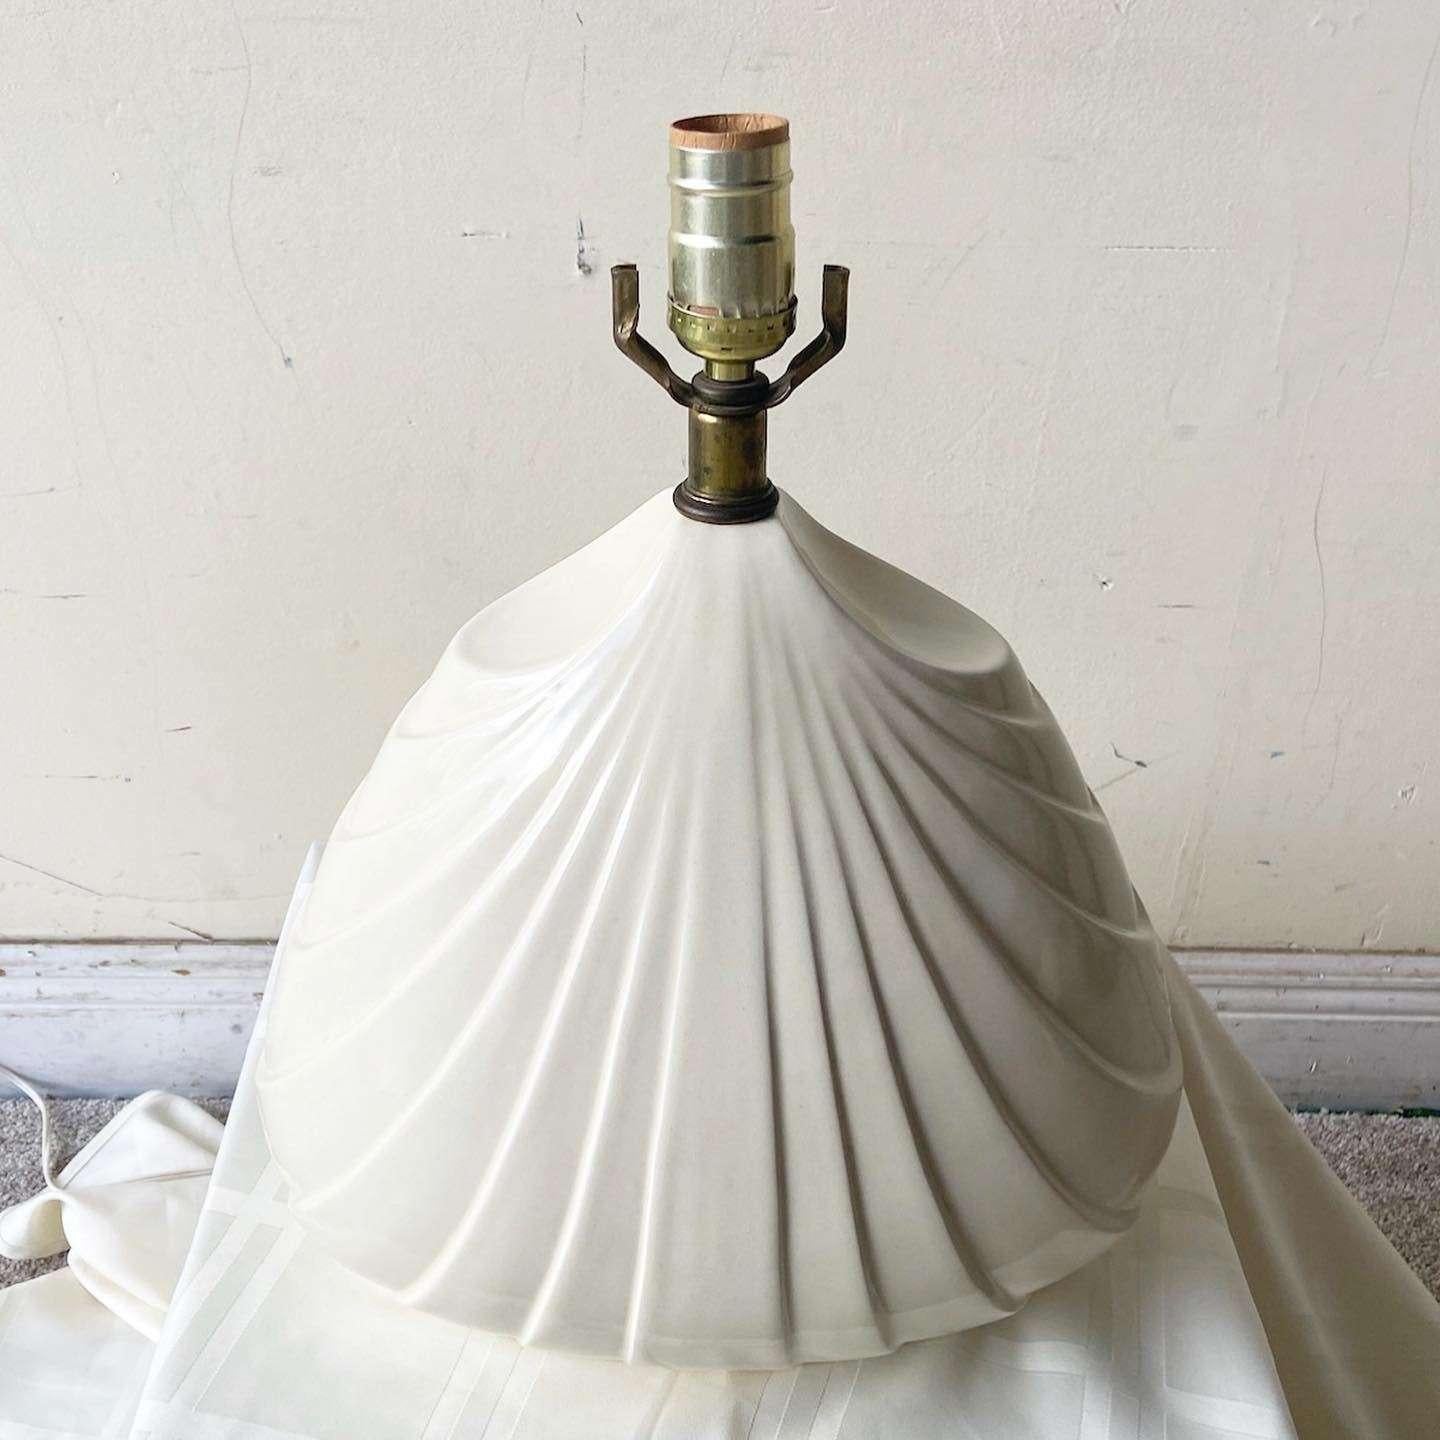 Vintage Postmodern Sculpted Ceramic Table Lamp In Good Condition For Sale In Delray Beach, FL